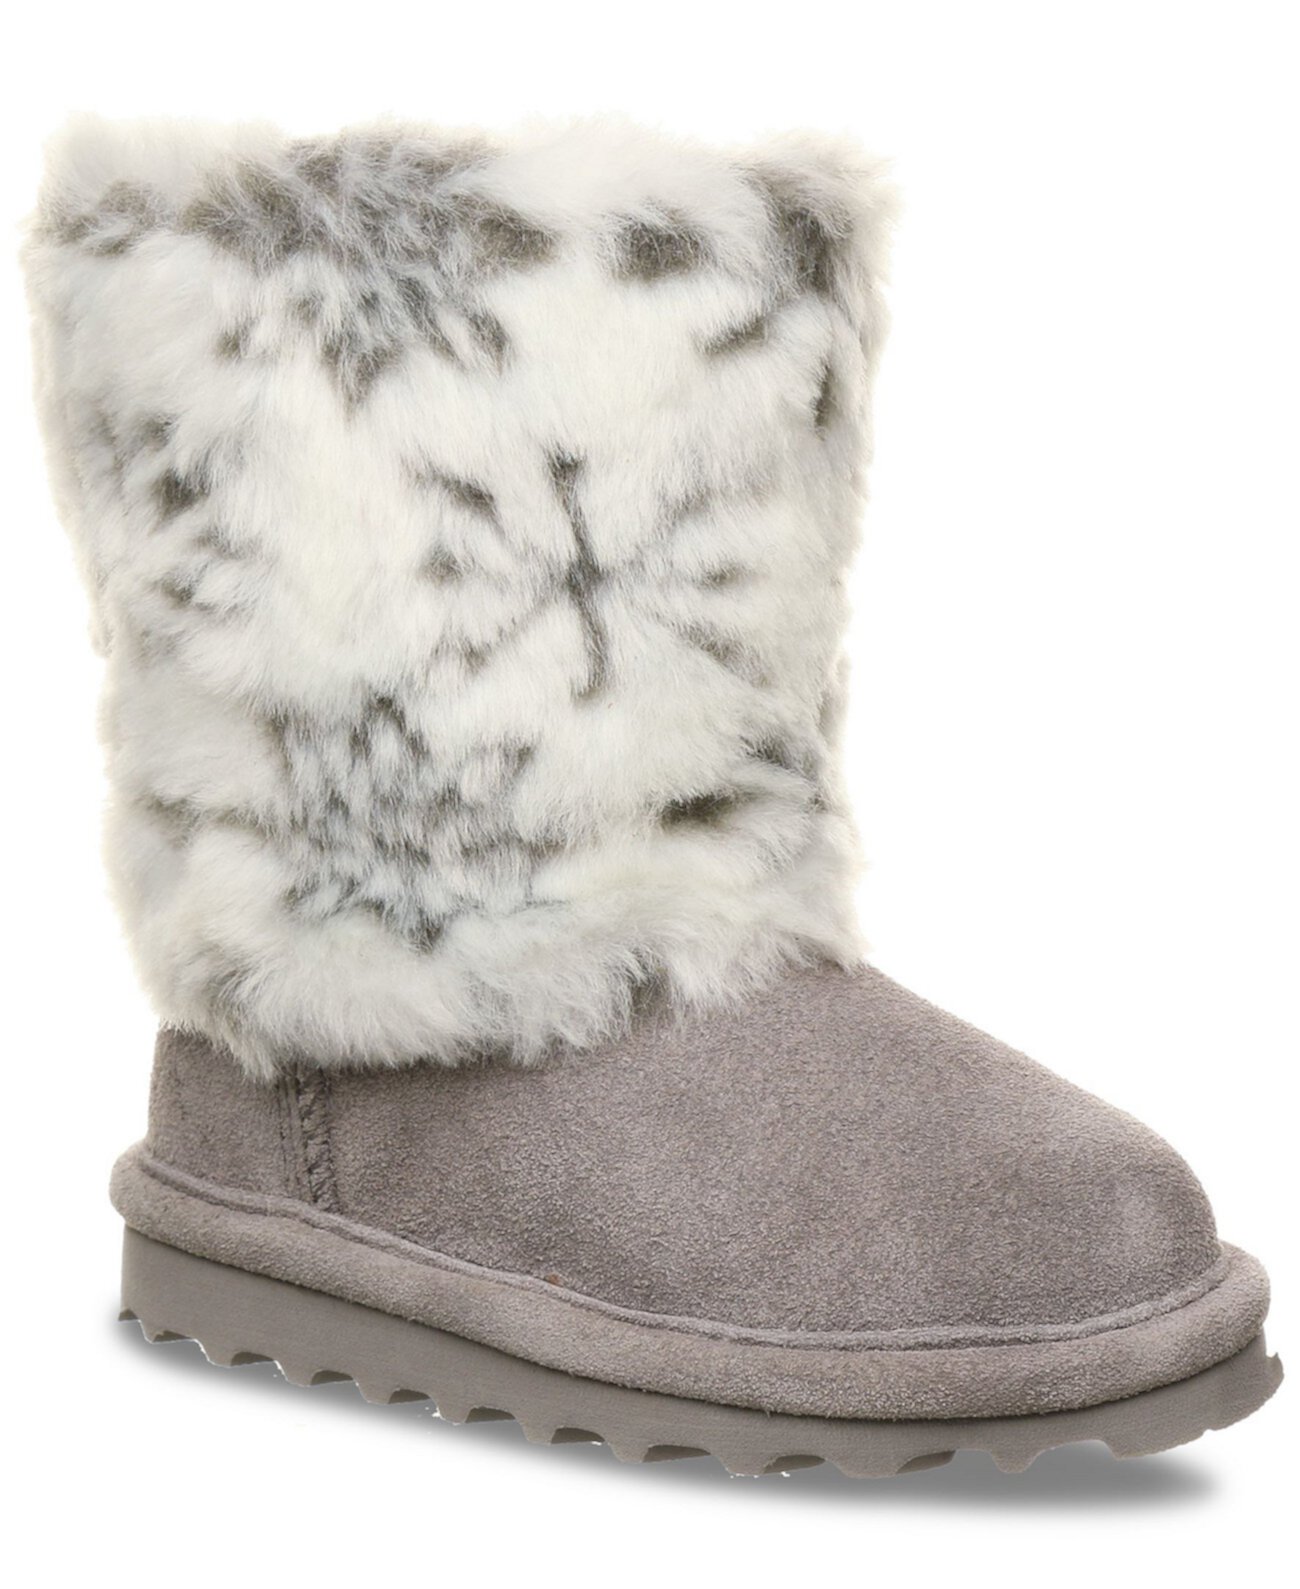 Toddler Girls Callie Boots from Finish Line Bearpaw